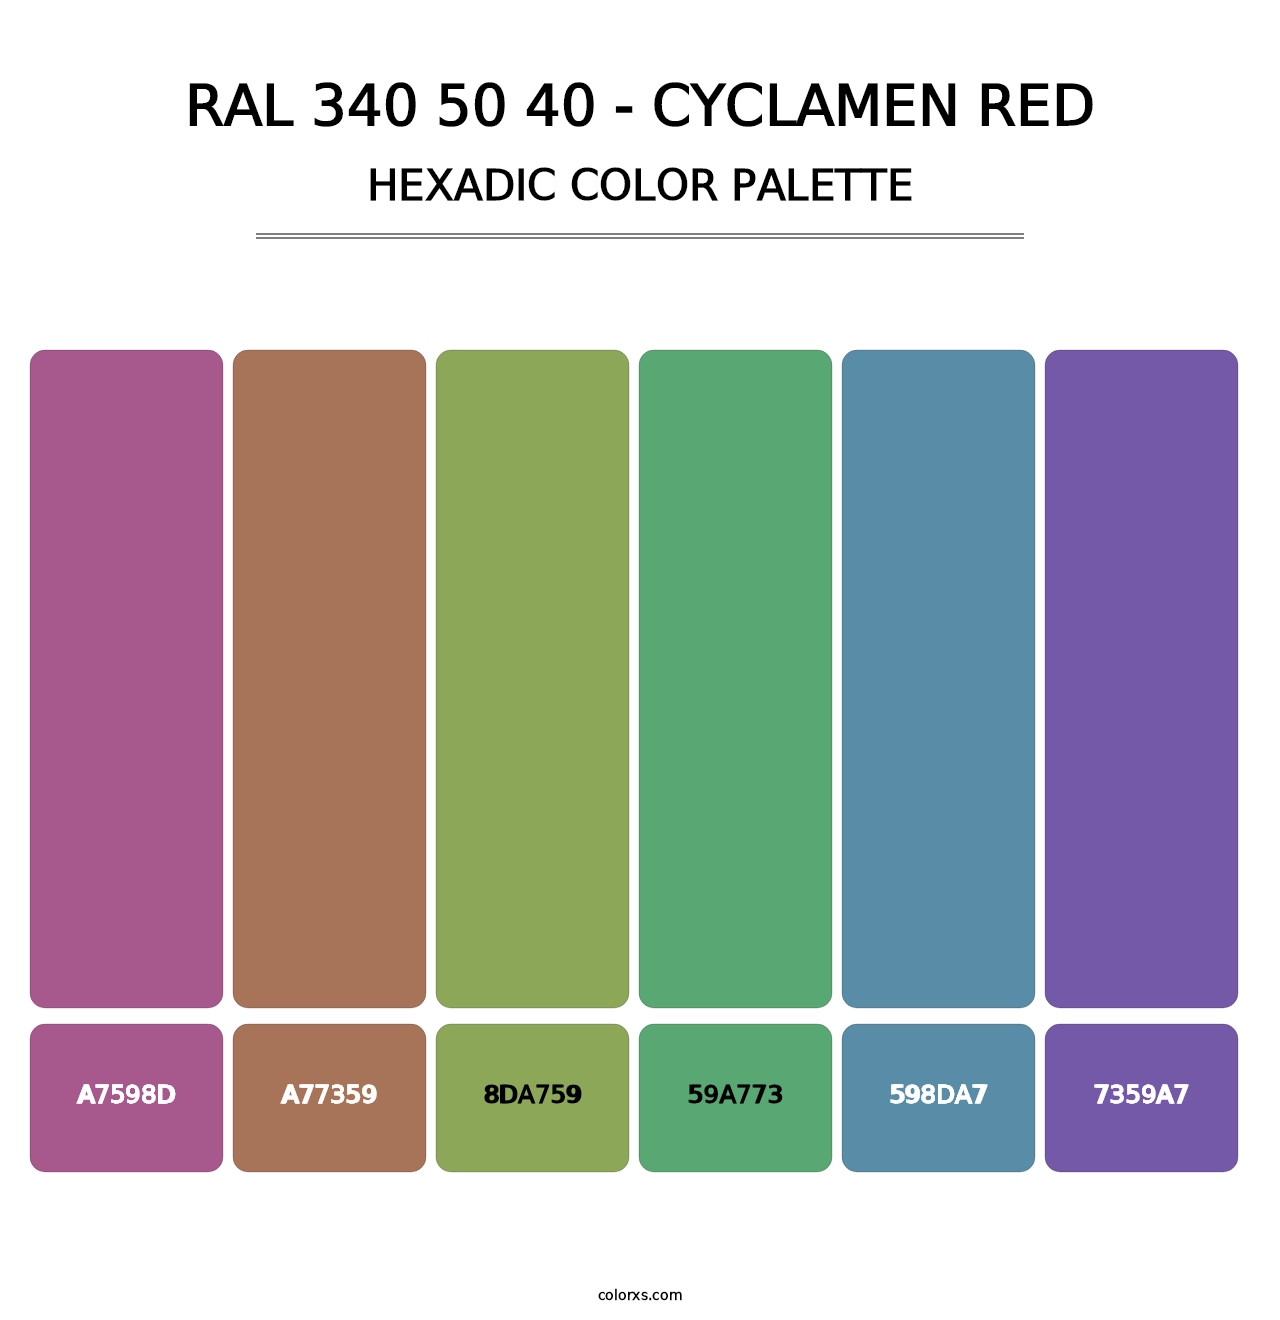 RAL 340 50 40 - Cyclamen Red - Hexadic Color Palette